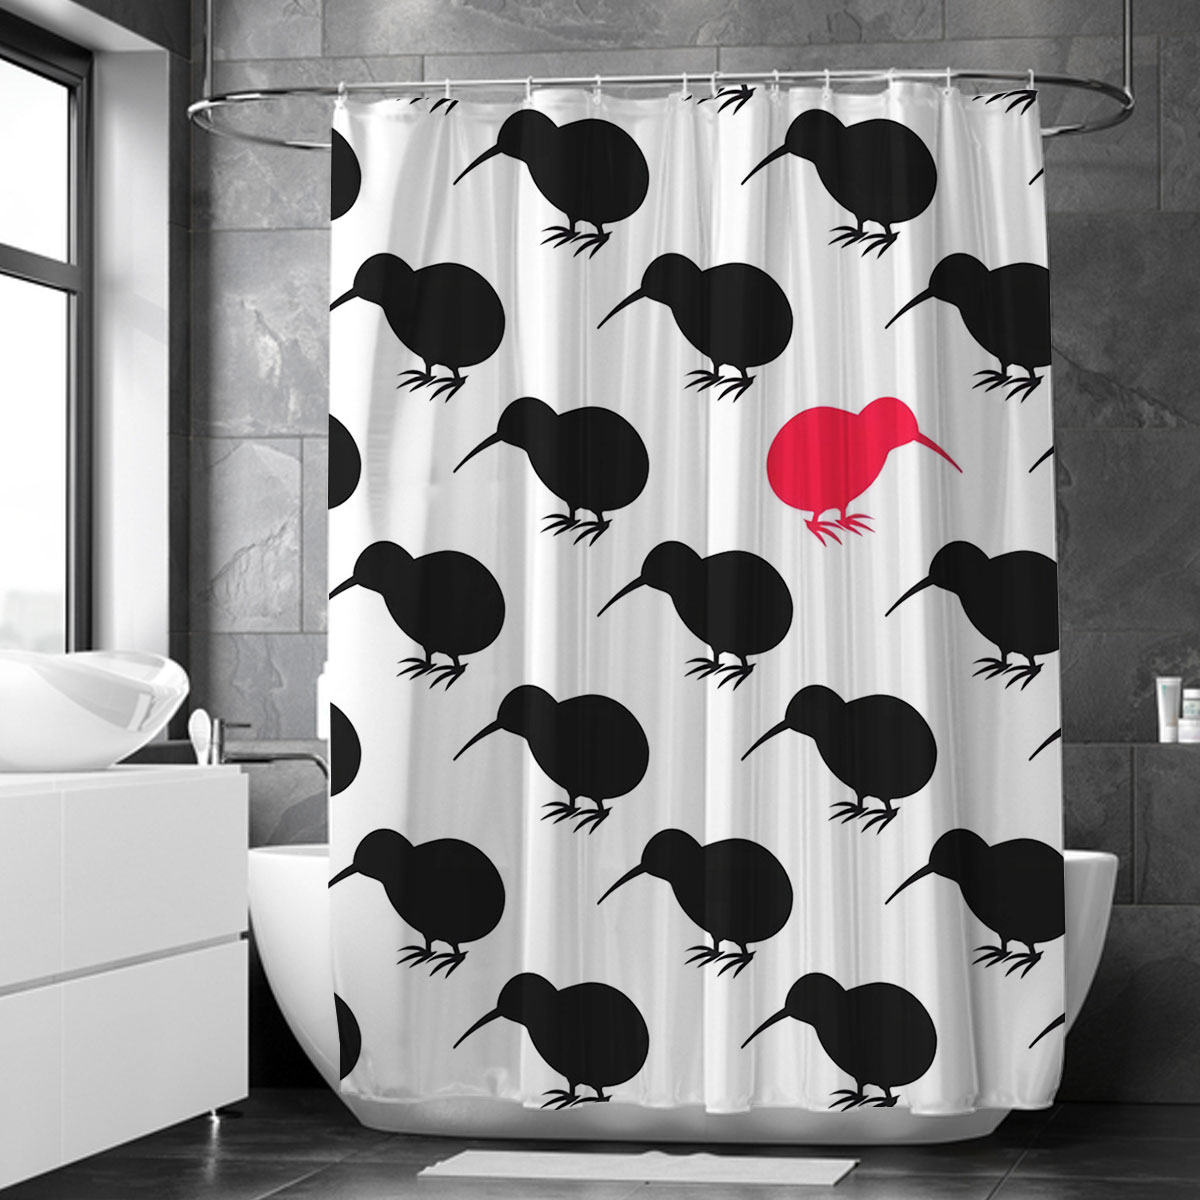 Lonely Red Kiwi Bird Shower Curtain 6